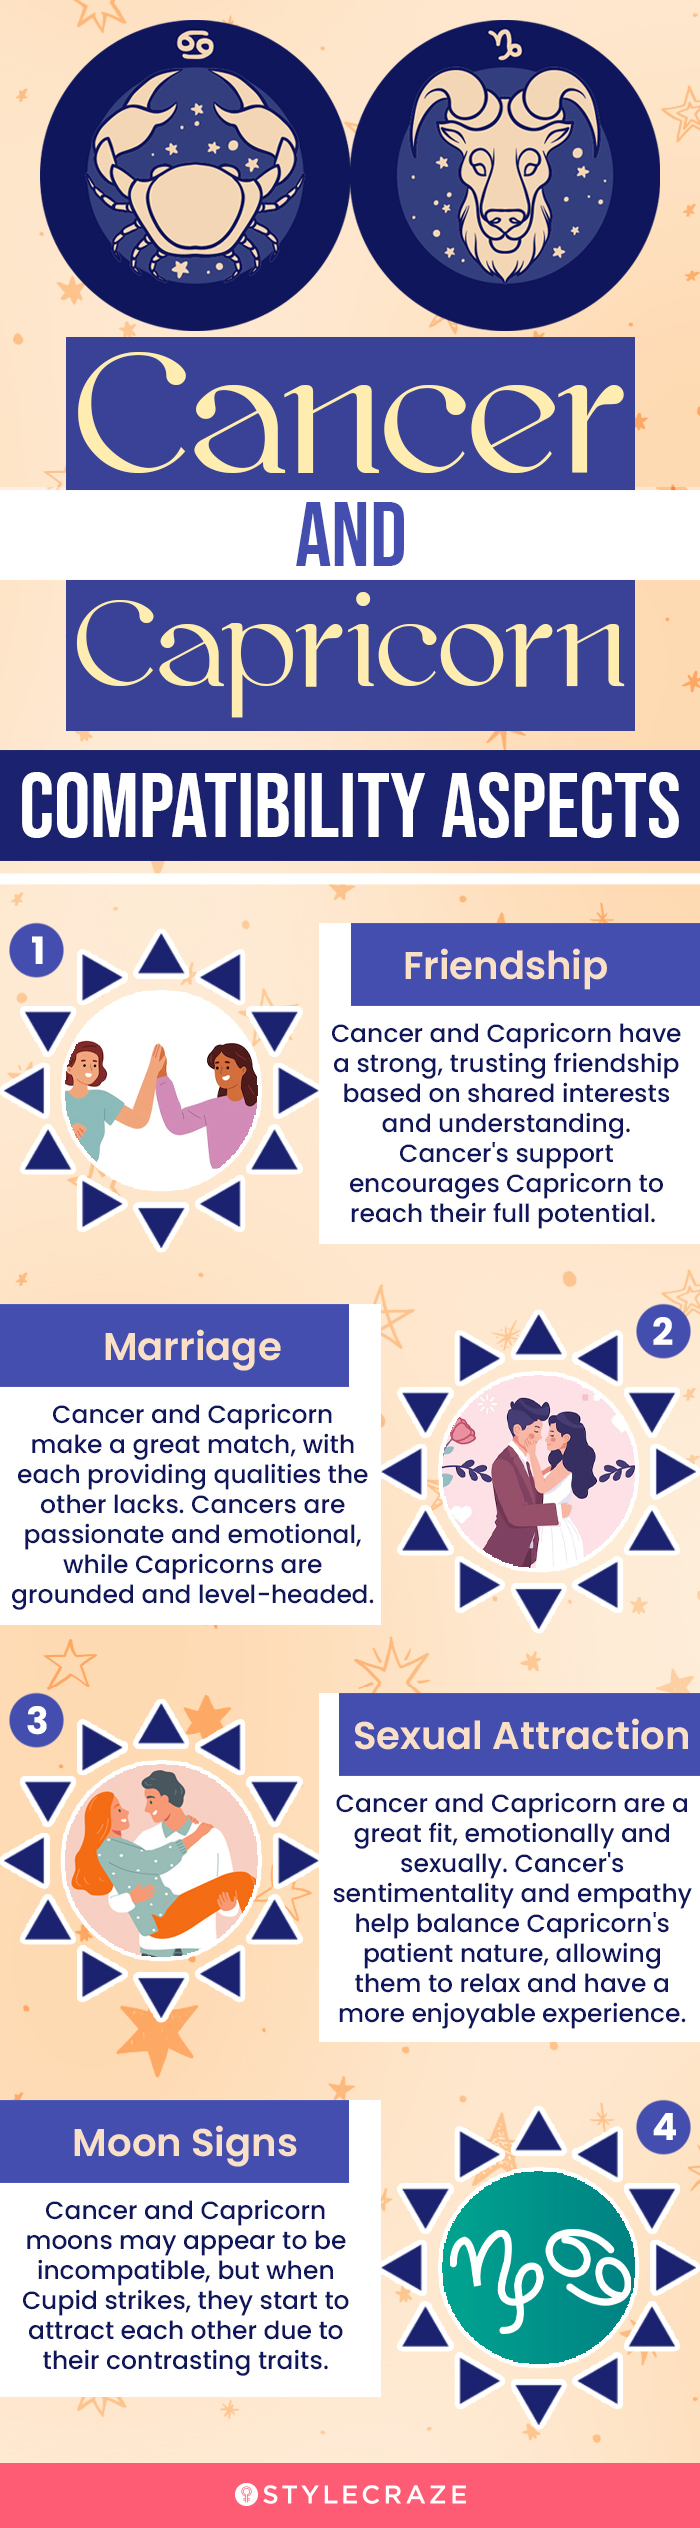 cancer and capricorn compatibility aspects (infographic)